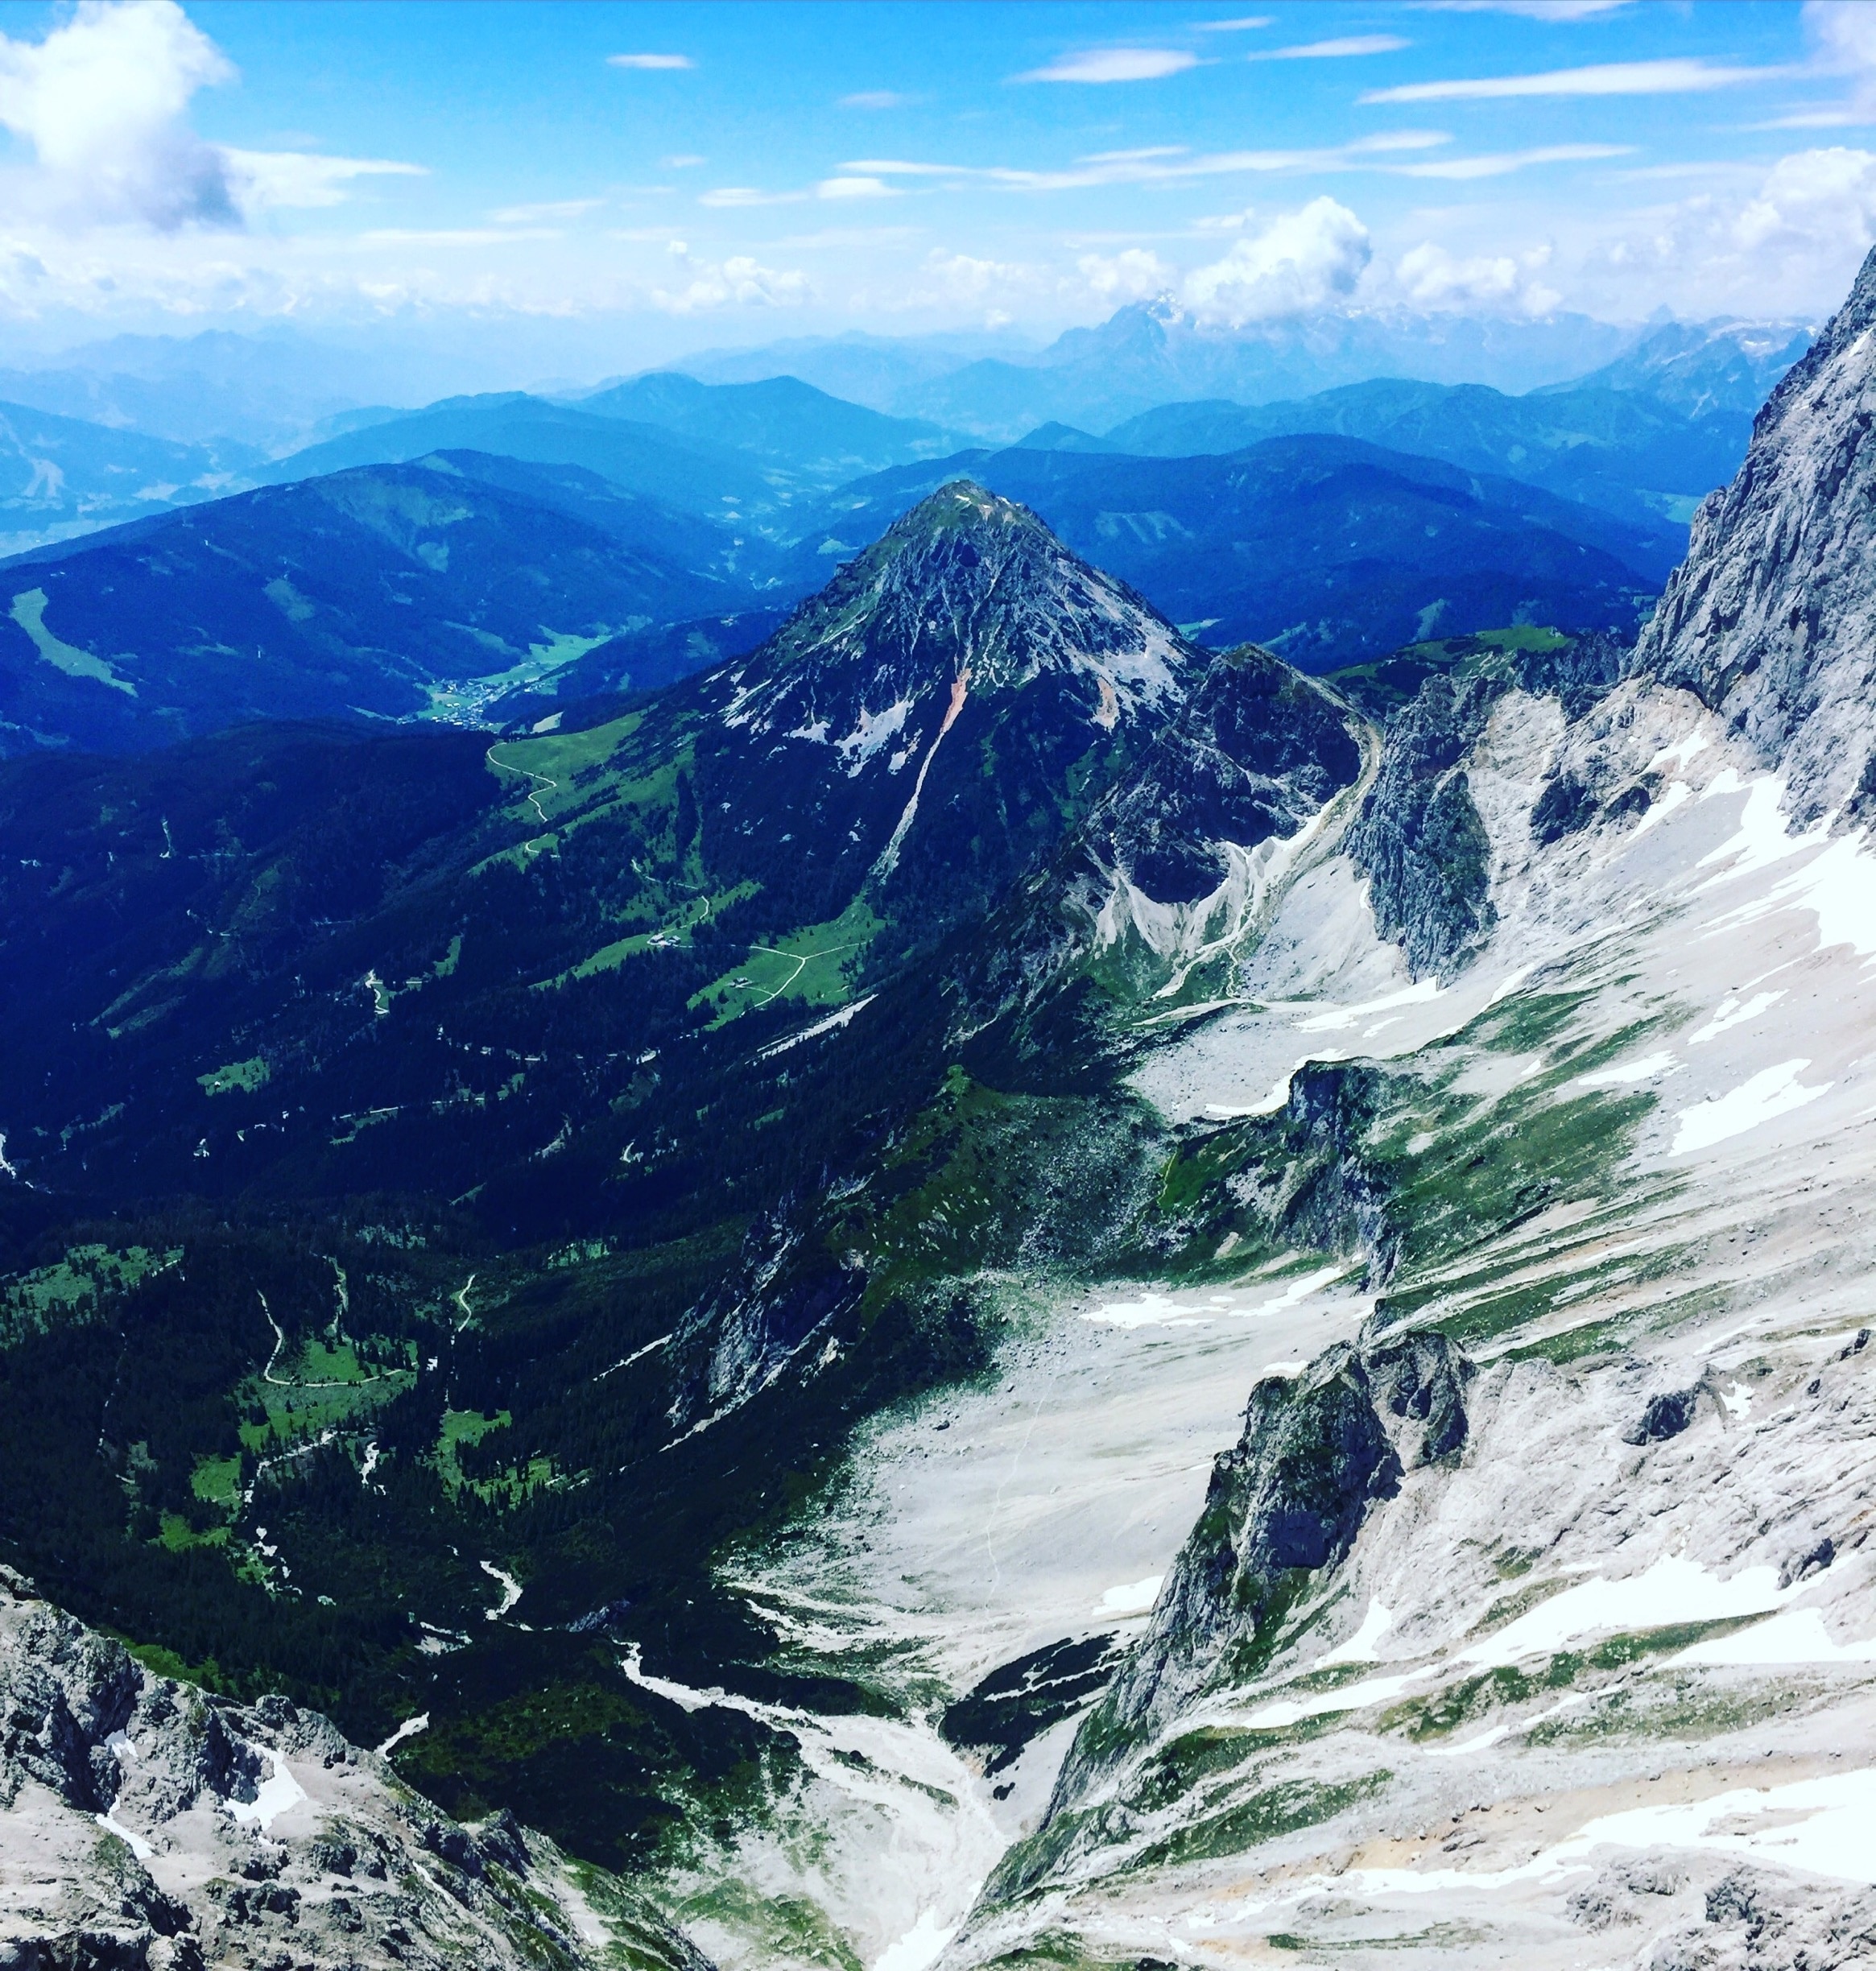 Views from the skywalk  at the Dachstein  Glacier. Amazing doing this and the stairway to nothingness. #dachstein #glacier #socold #skywalk #stairway 